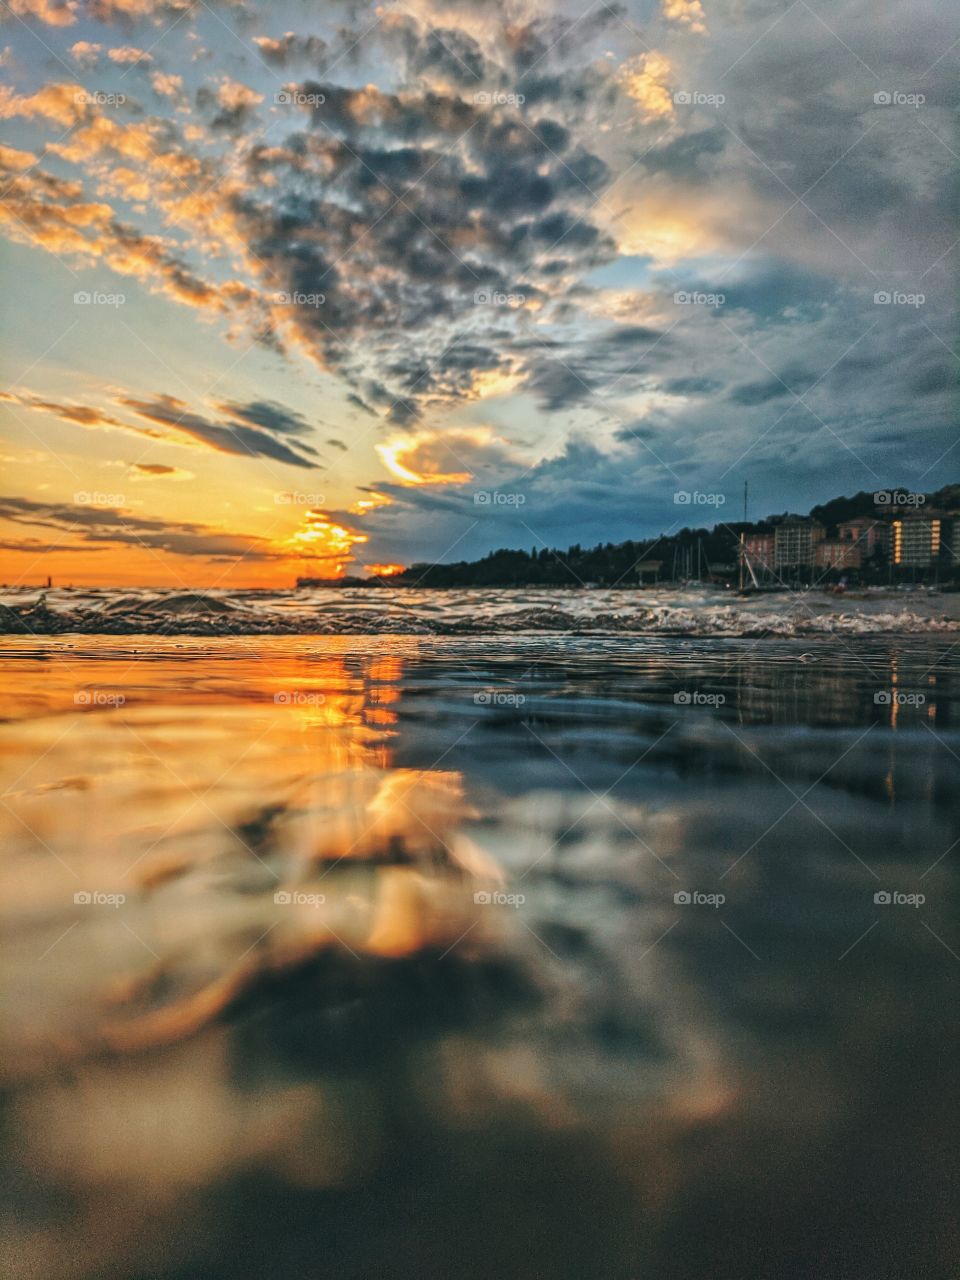 Wonderful reflection of sunset on the Adriatic Sea in Slovenia.